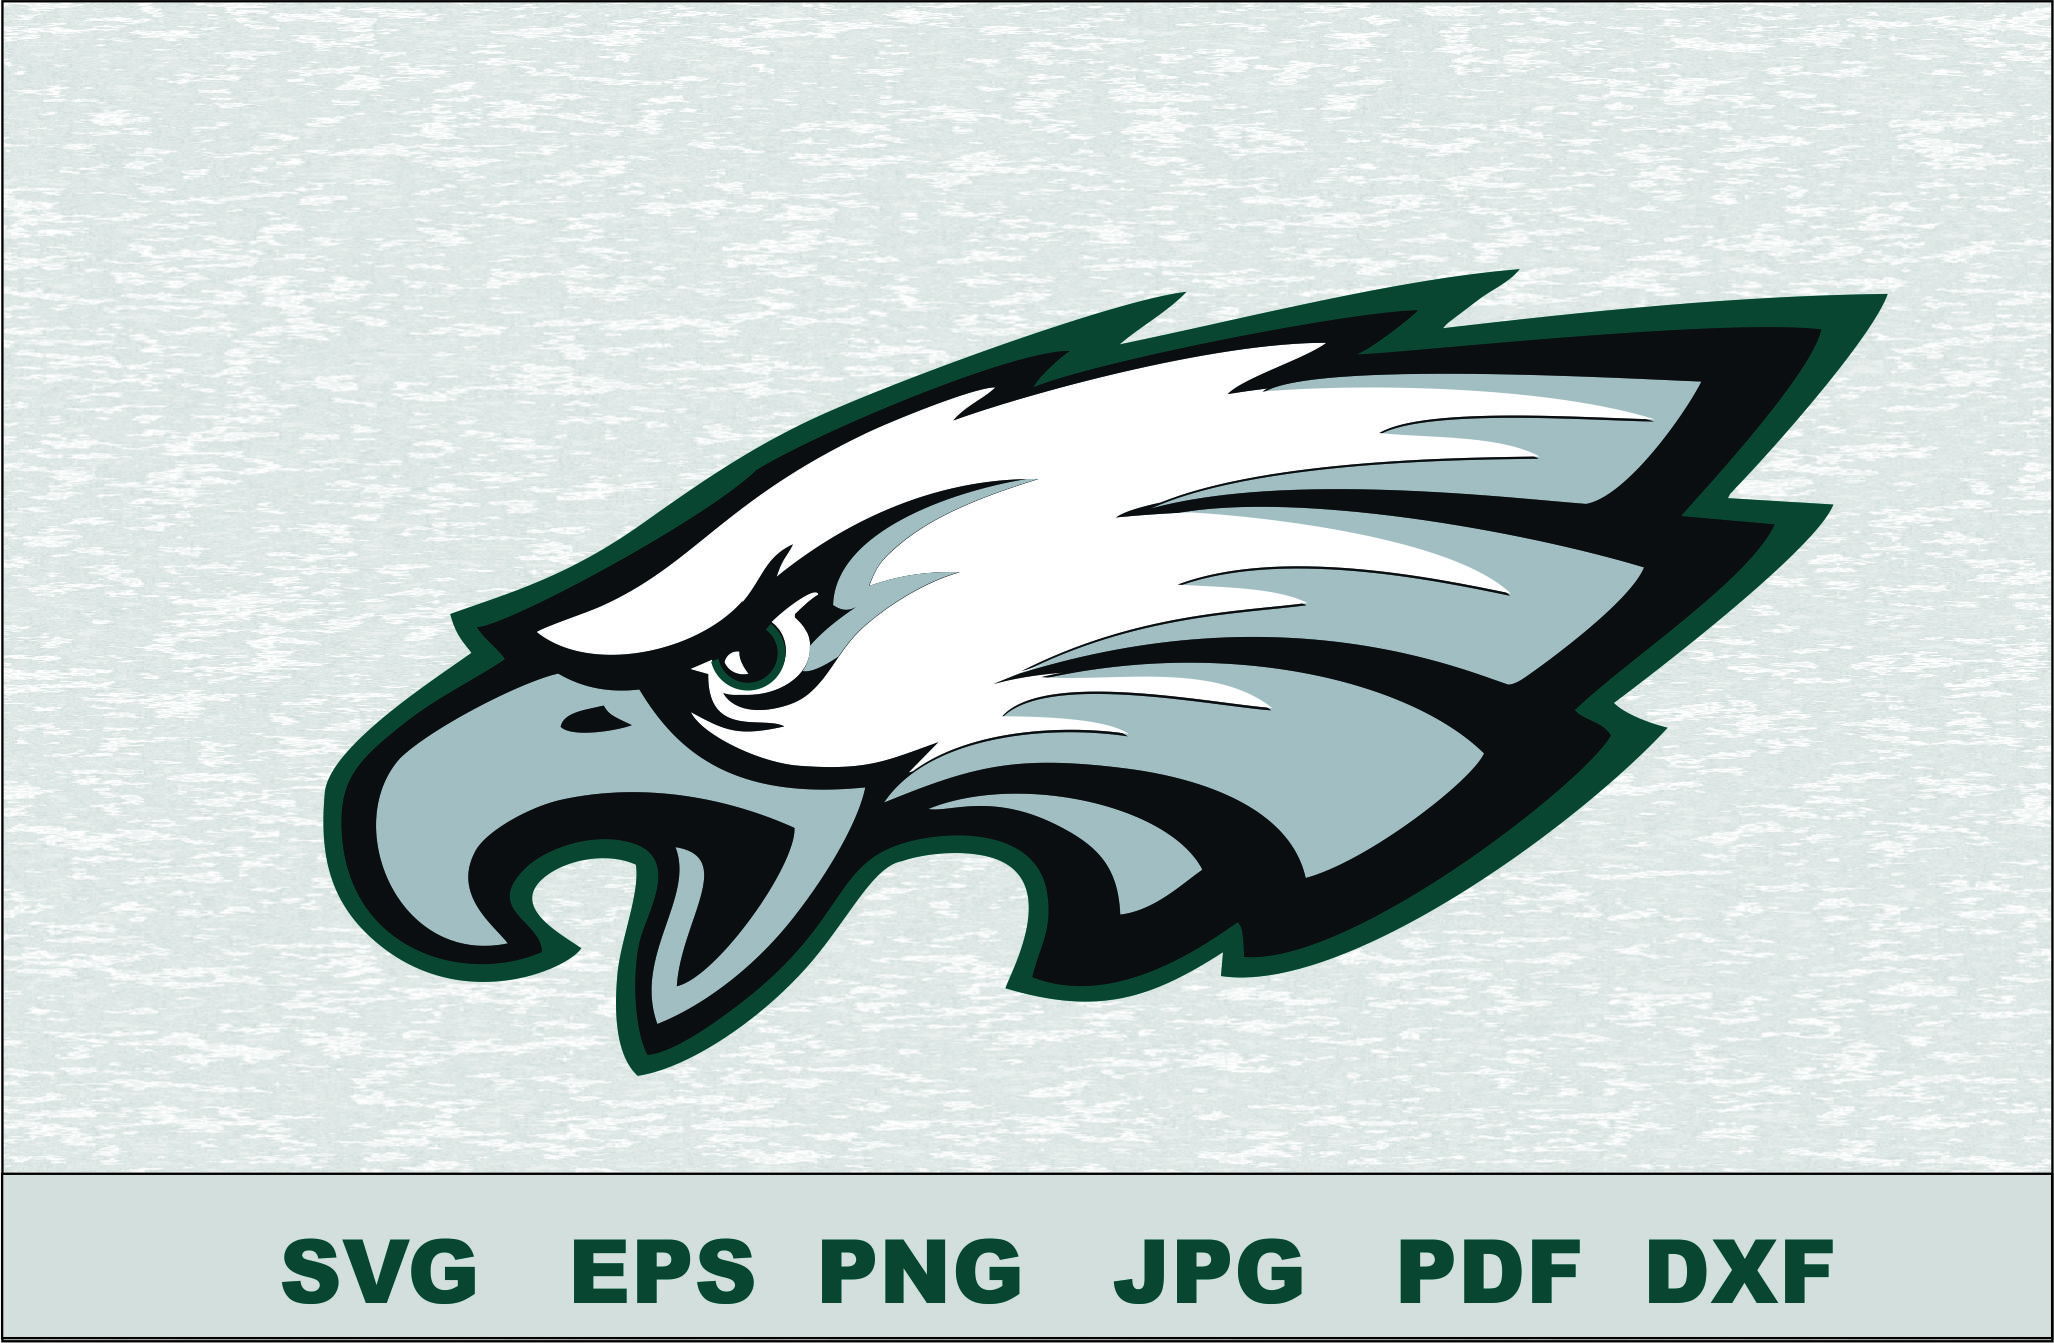 Download Free Philadelphia Eagles Svg Dxf Logo Silhouette Studio Transfer Iron On Cut File Cameo Cricut Iron On Decal Vinyl Decal Layered Vector PSD Mockup Template